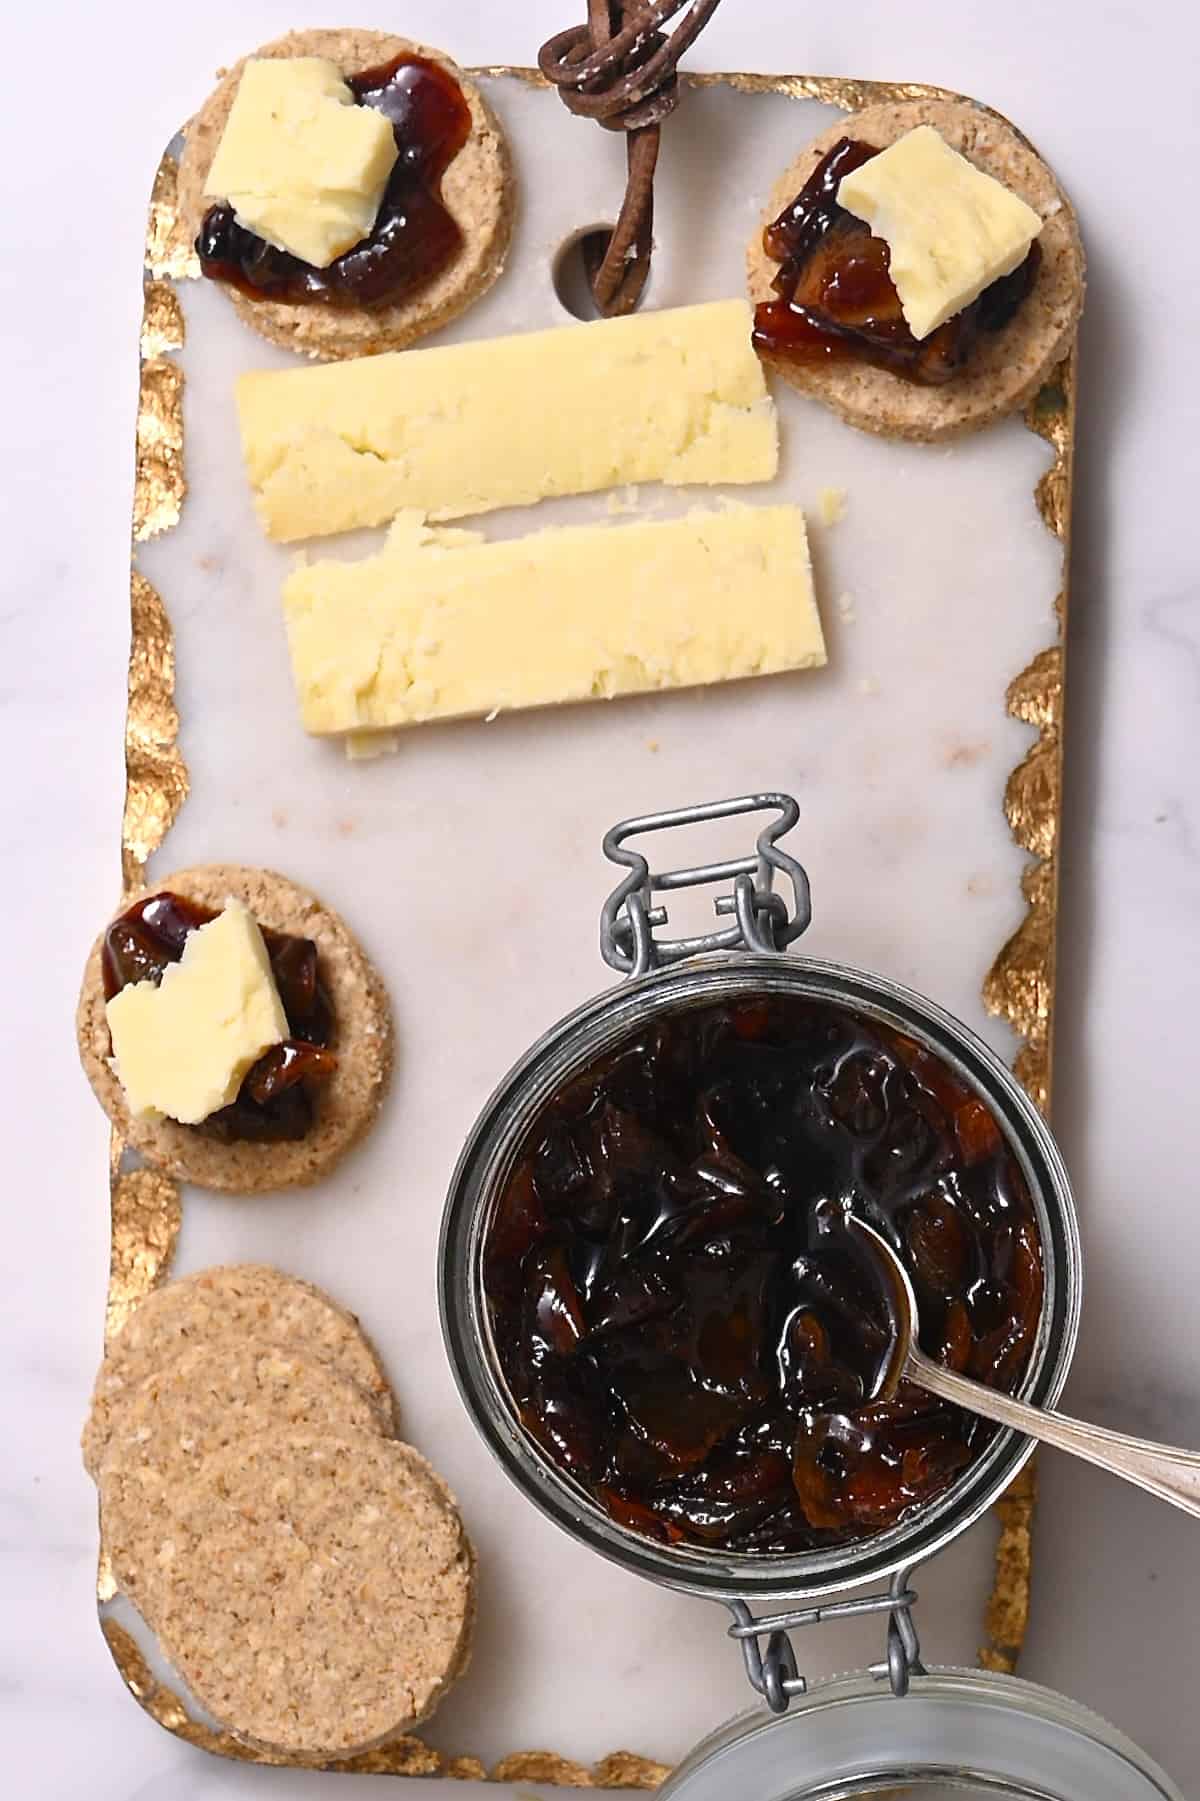 Onion jam in a jar and crackers and cheese next to it